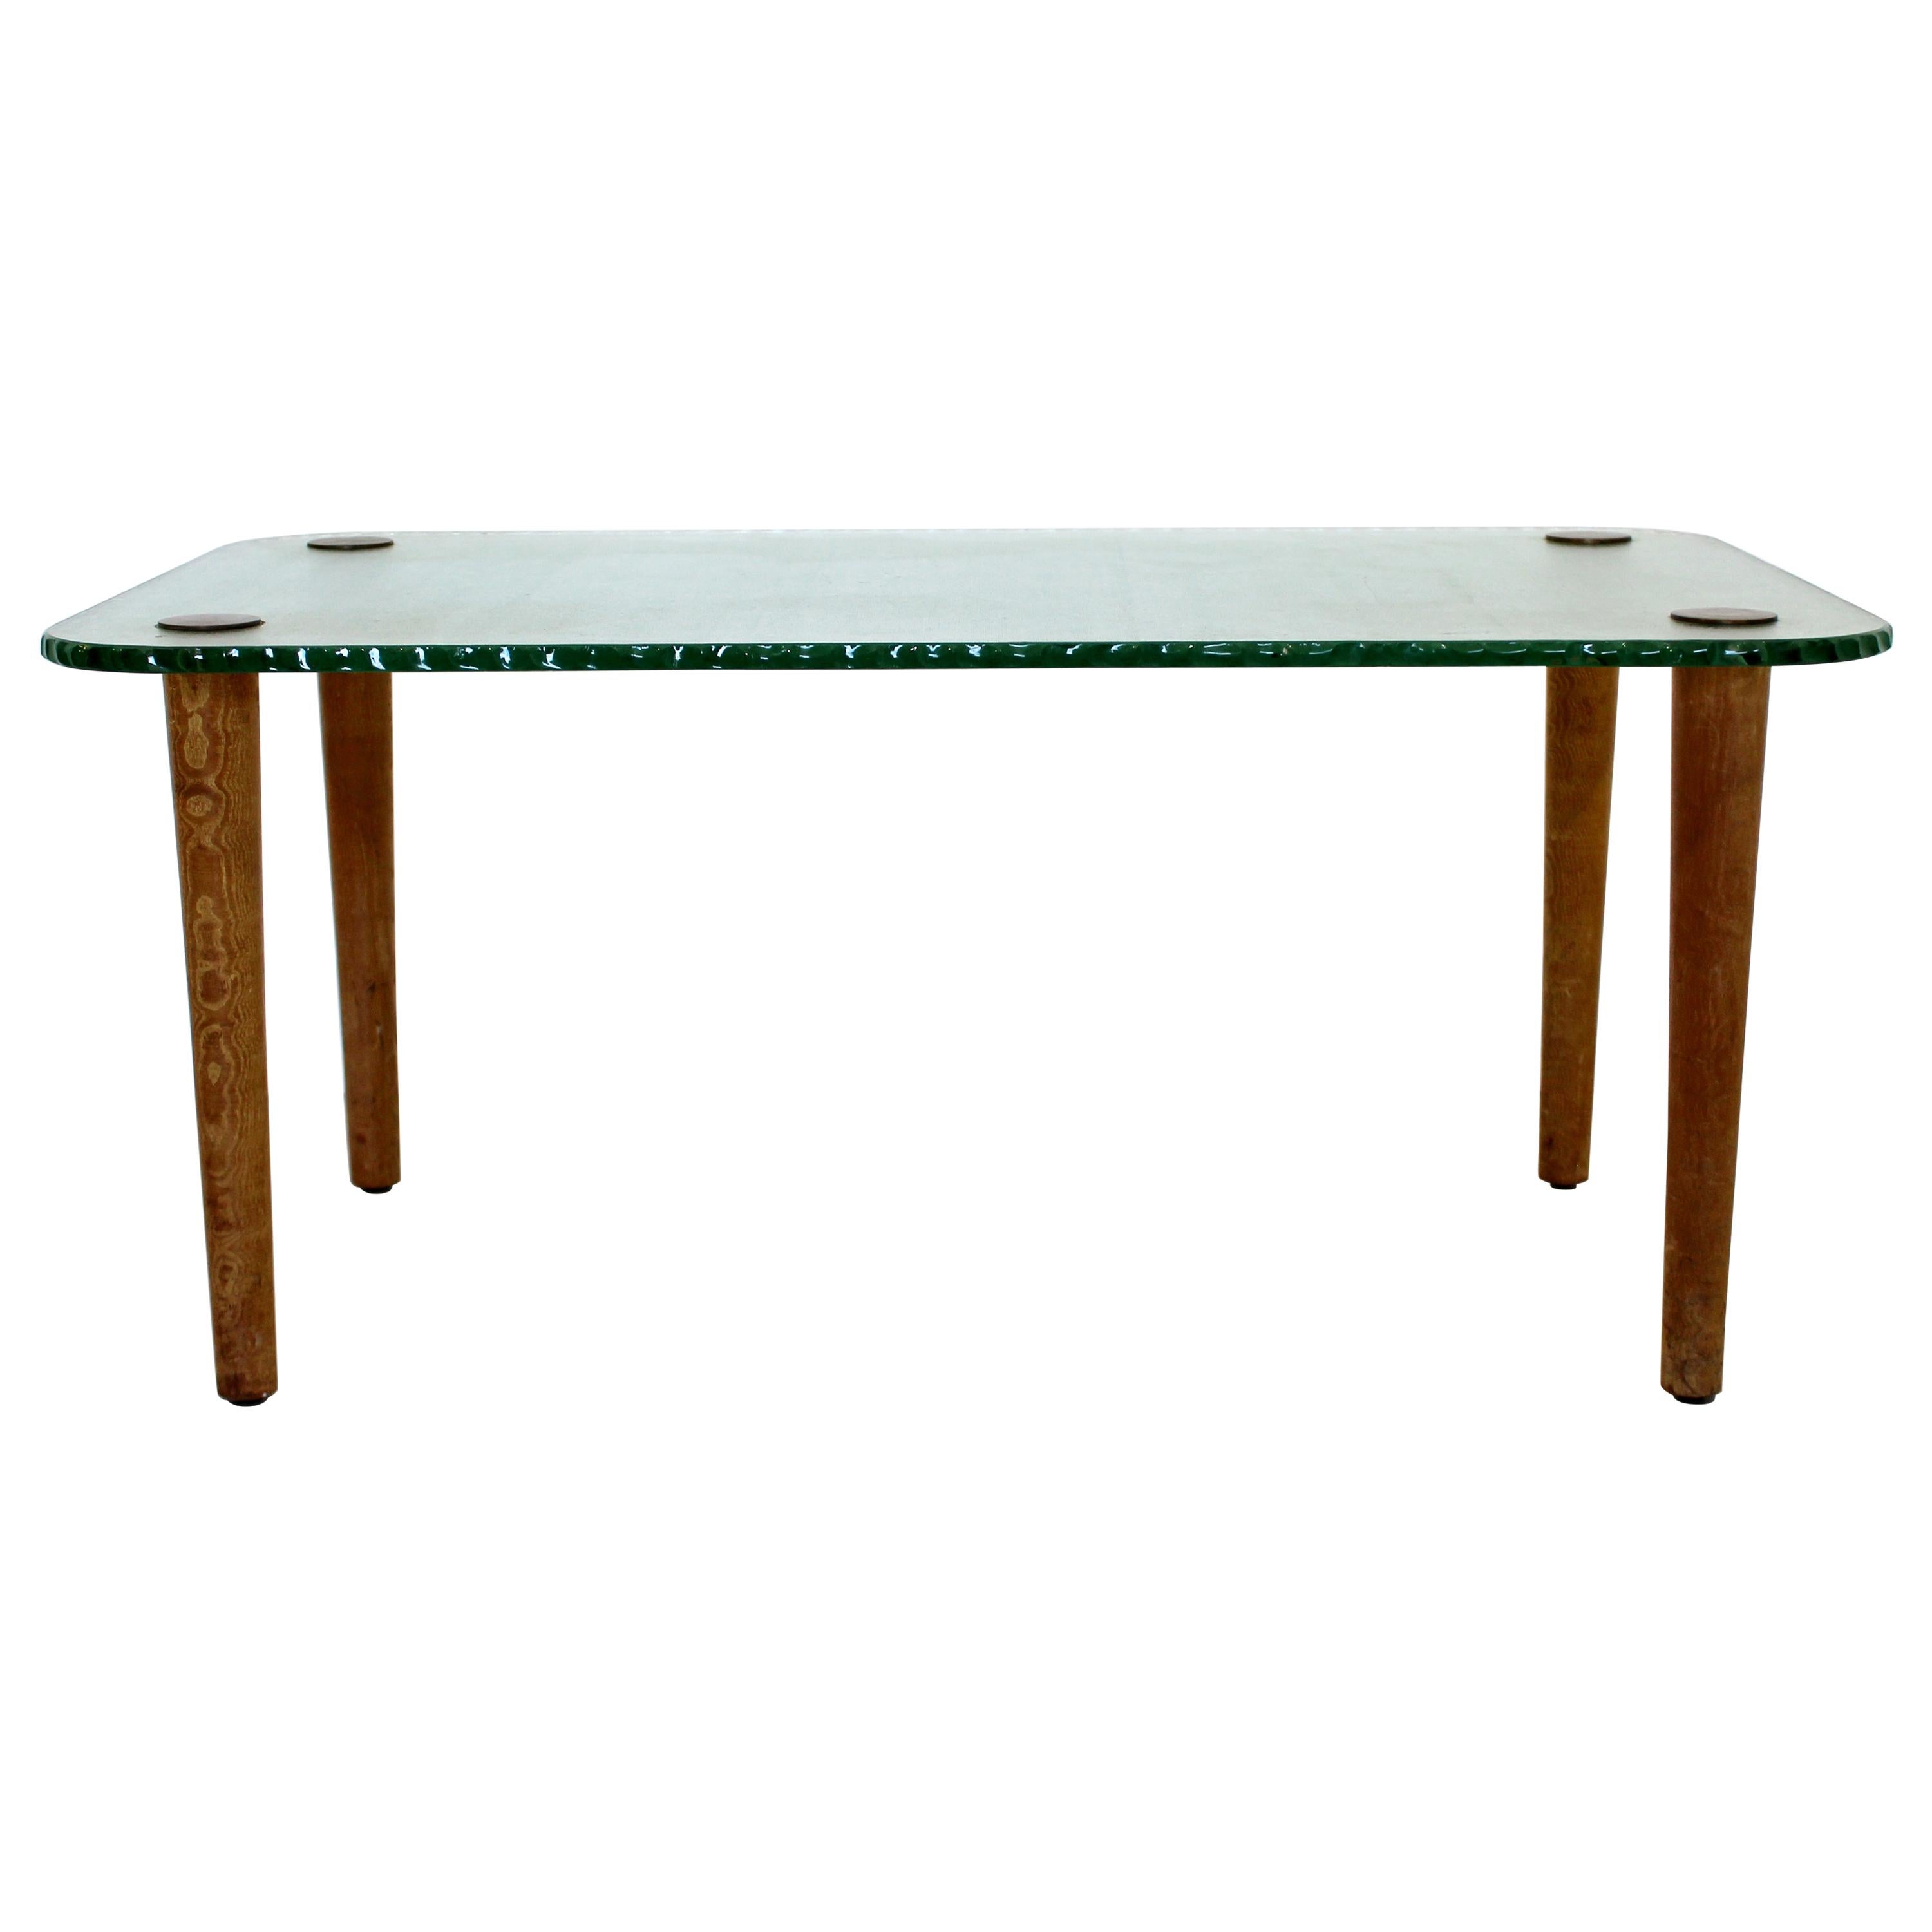 Art Deco Wood Bronze Tempered Chipped Edge Glass Coffee Table 1940s Rohde Style